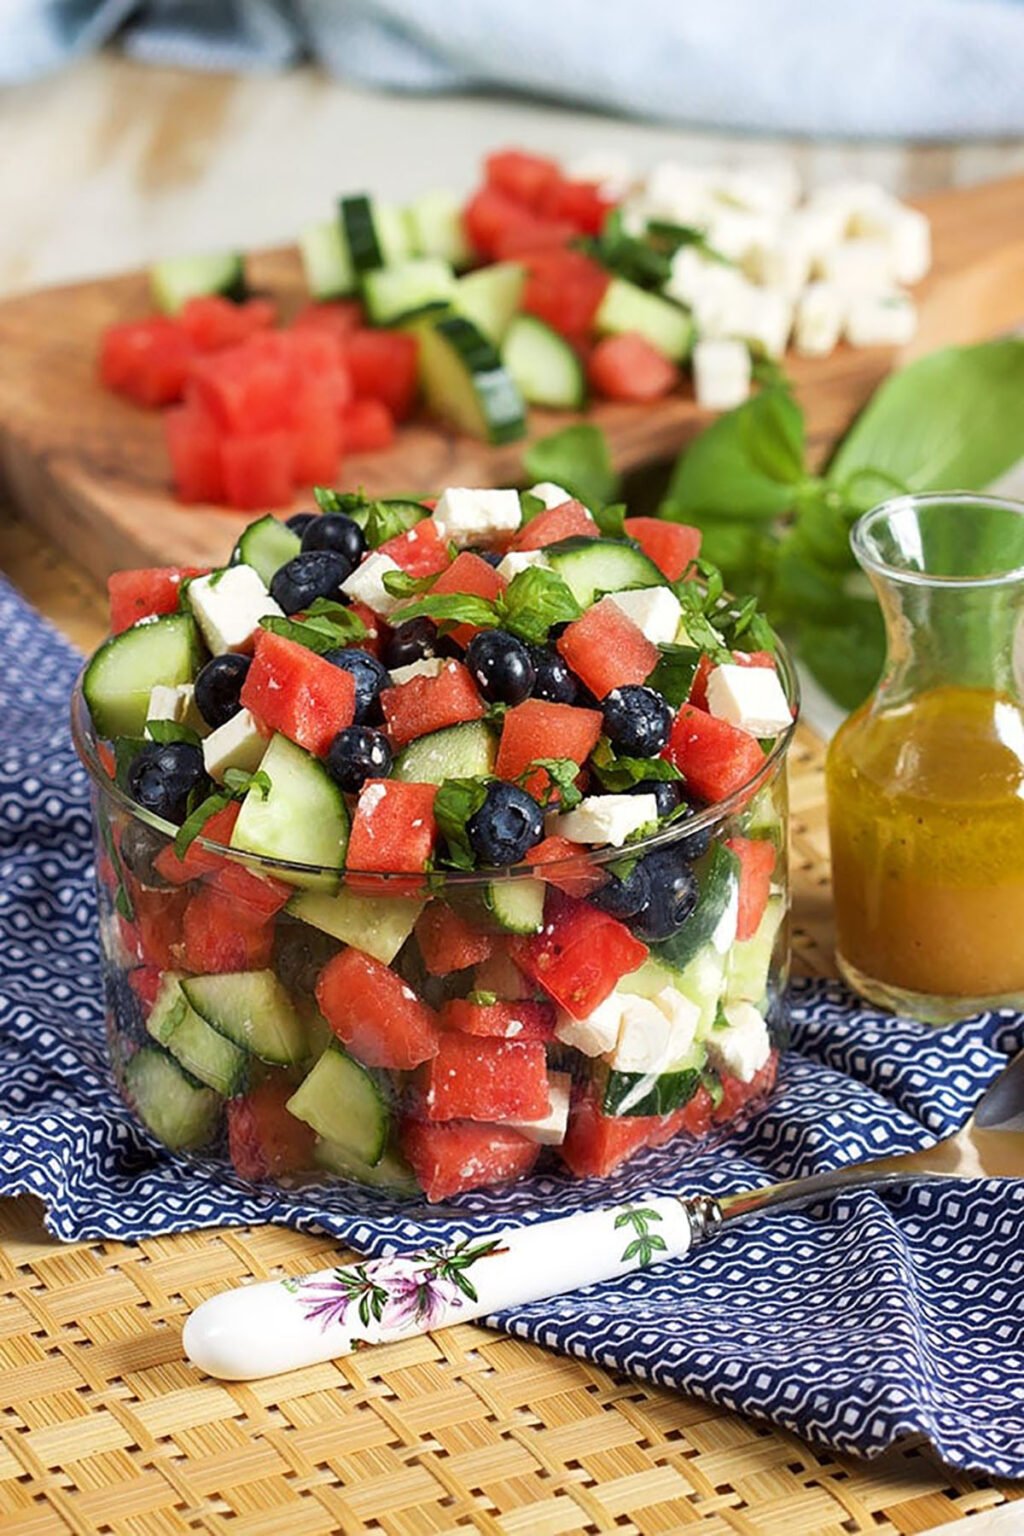 Watermelon Feta Salad with Cucumber and Blueberries - The Suburban Soapbox